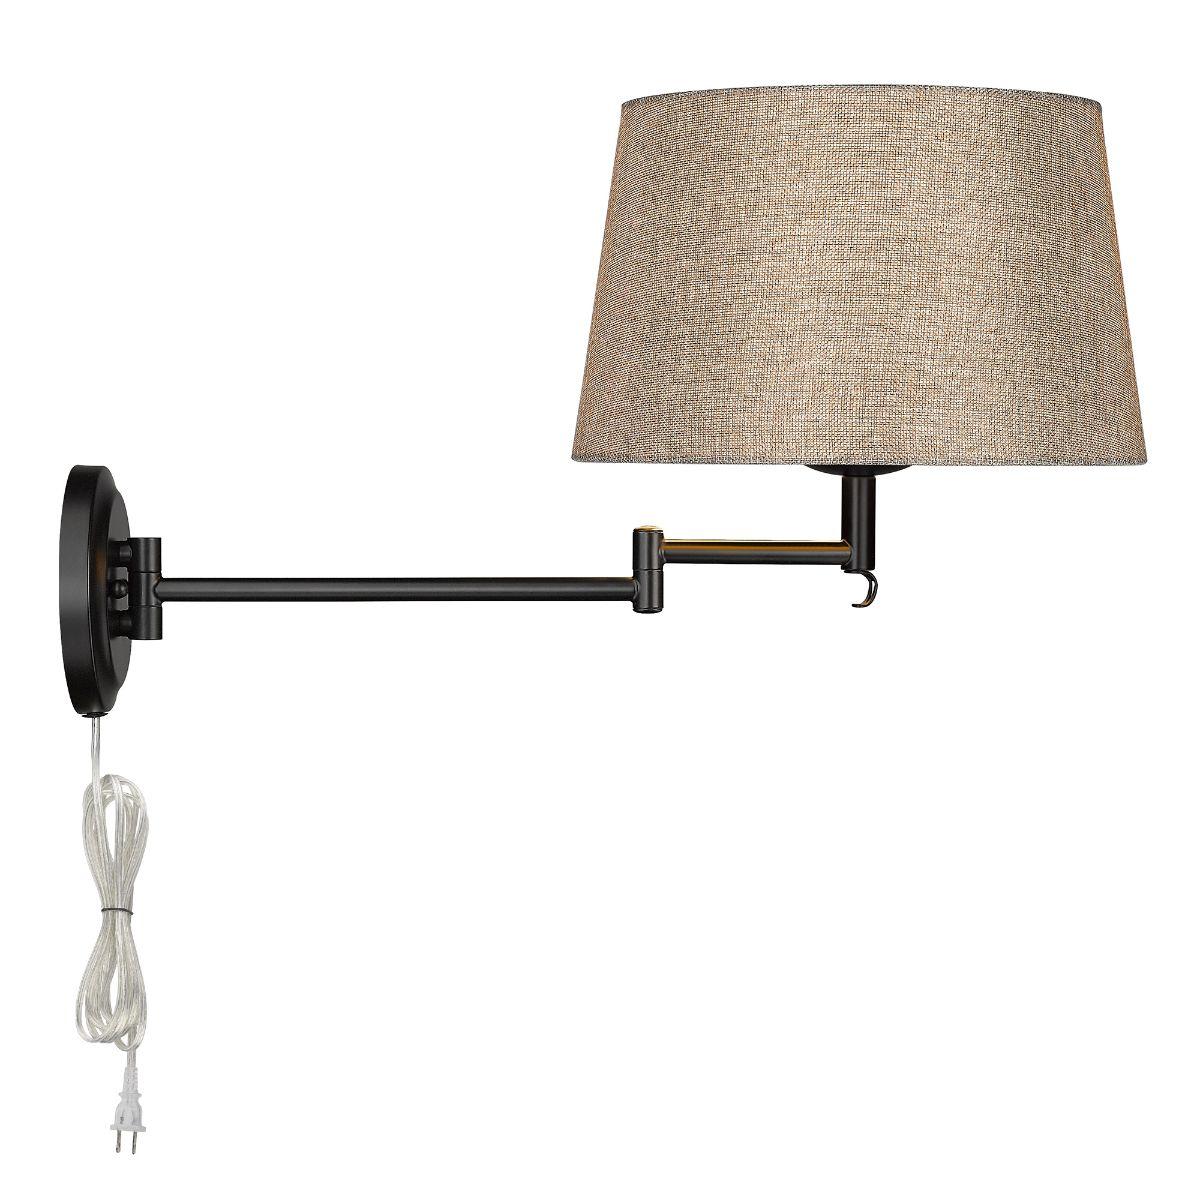 Eleanor 13 in. Wall Sconce Matte Black Finish with Natural Sisal Shade